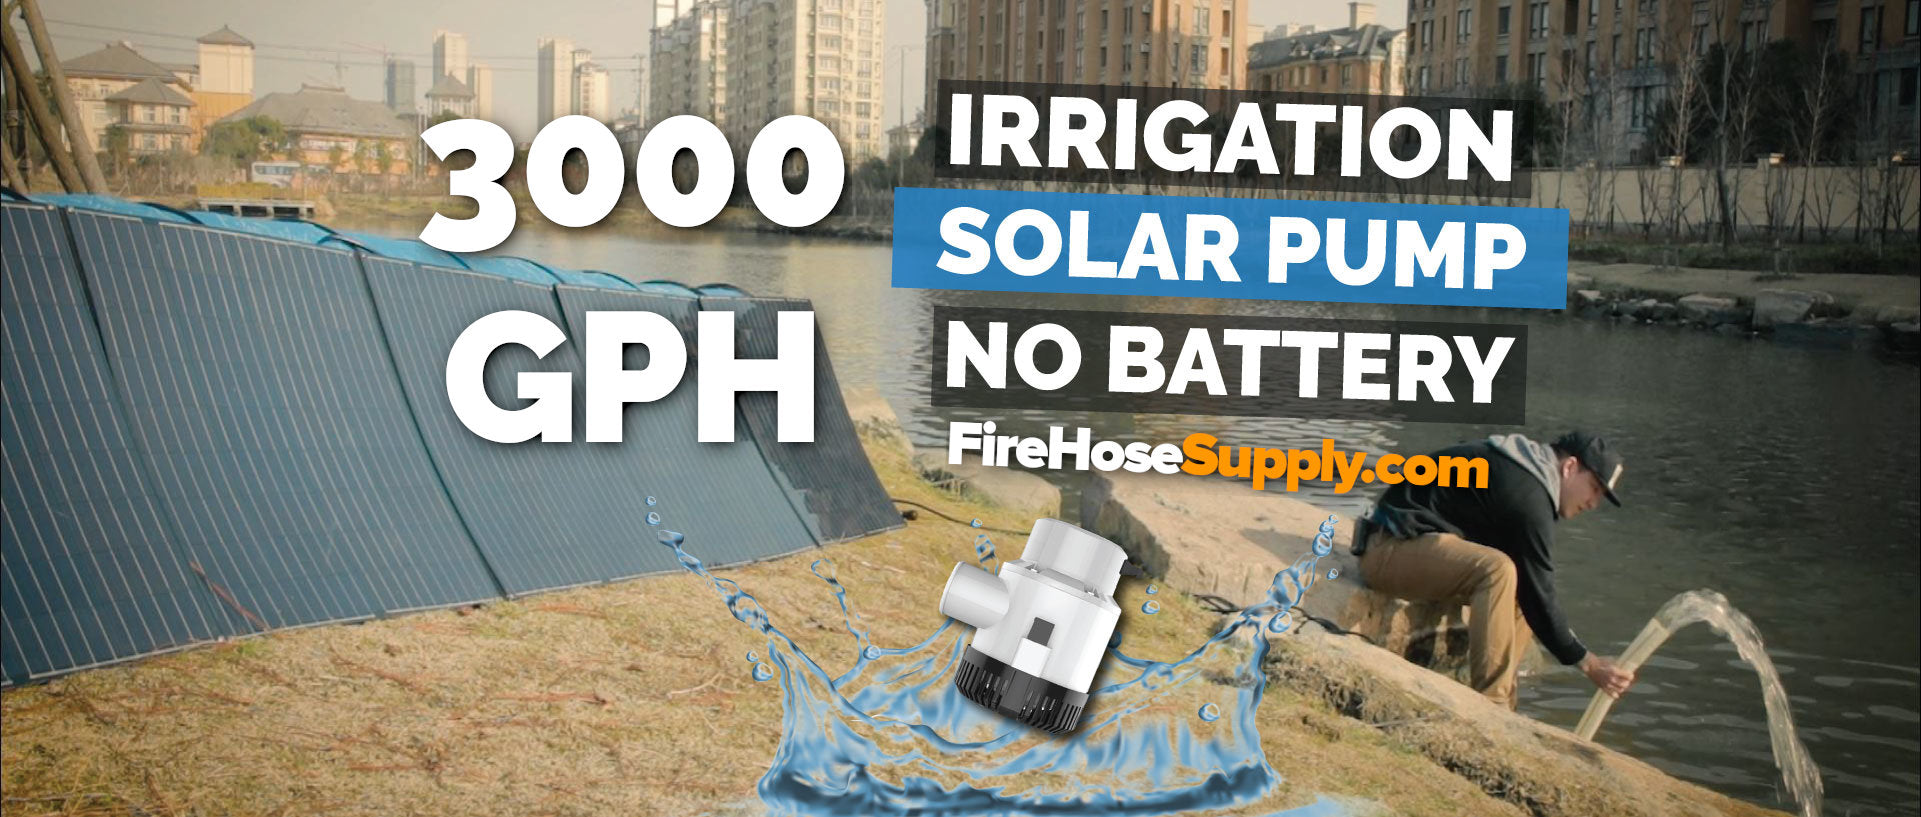 irrigation solar pump system cheap low cost